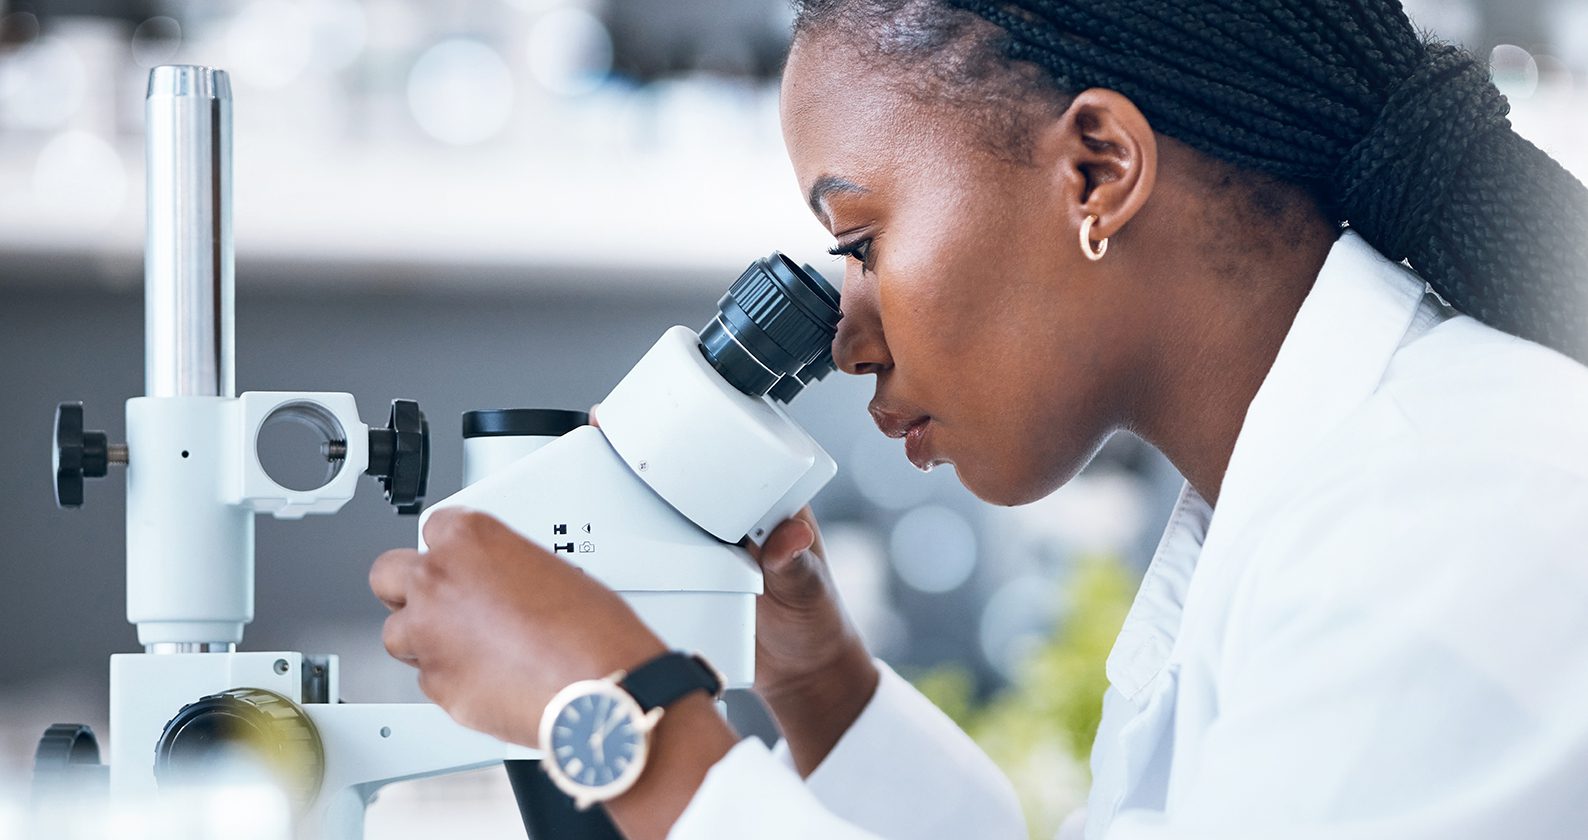 Woman looking into a microscope in a medical lab setting.